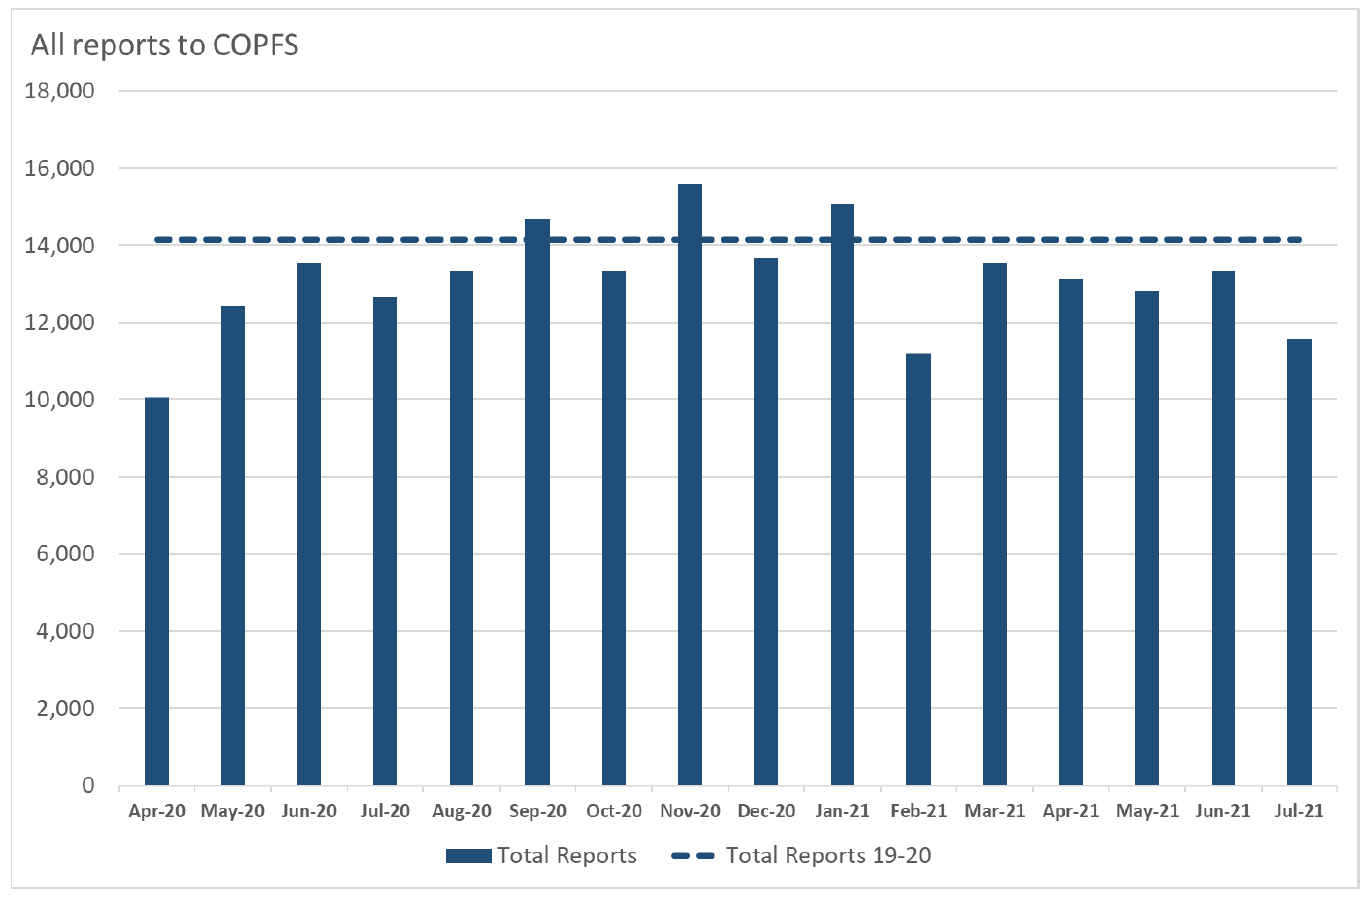 Line graph showing the total number of reports received by COPFS